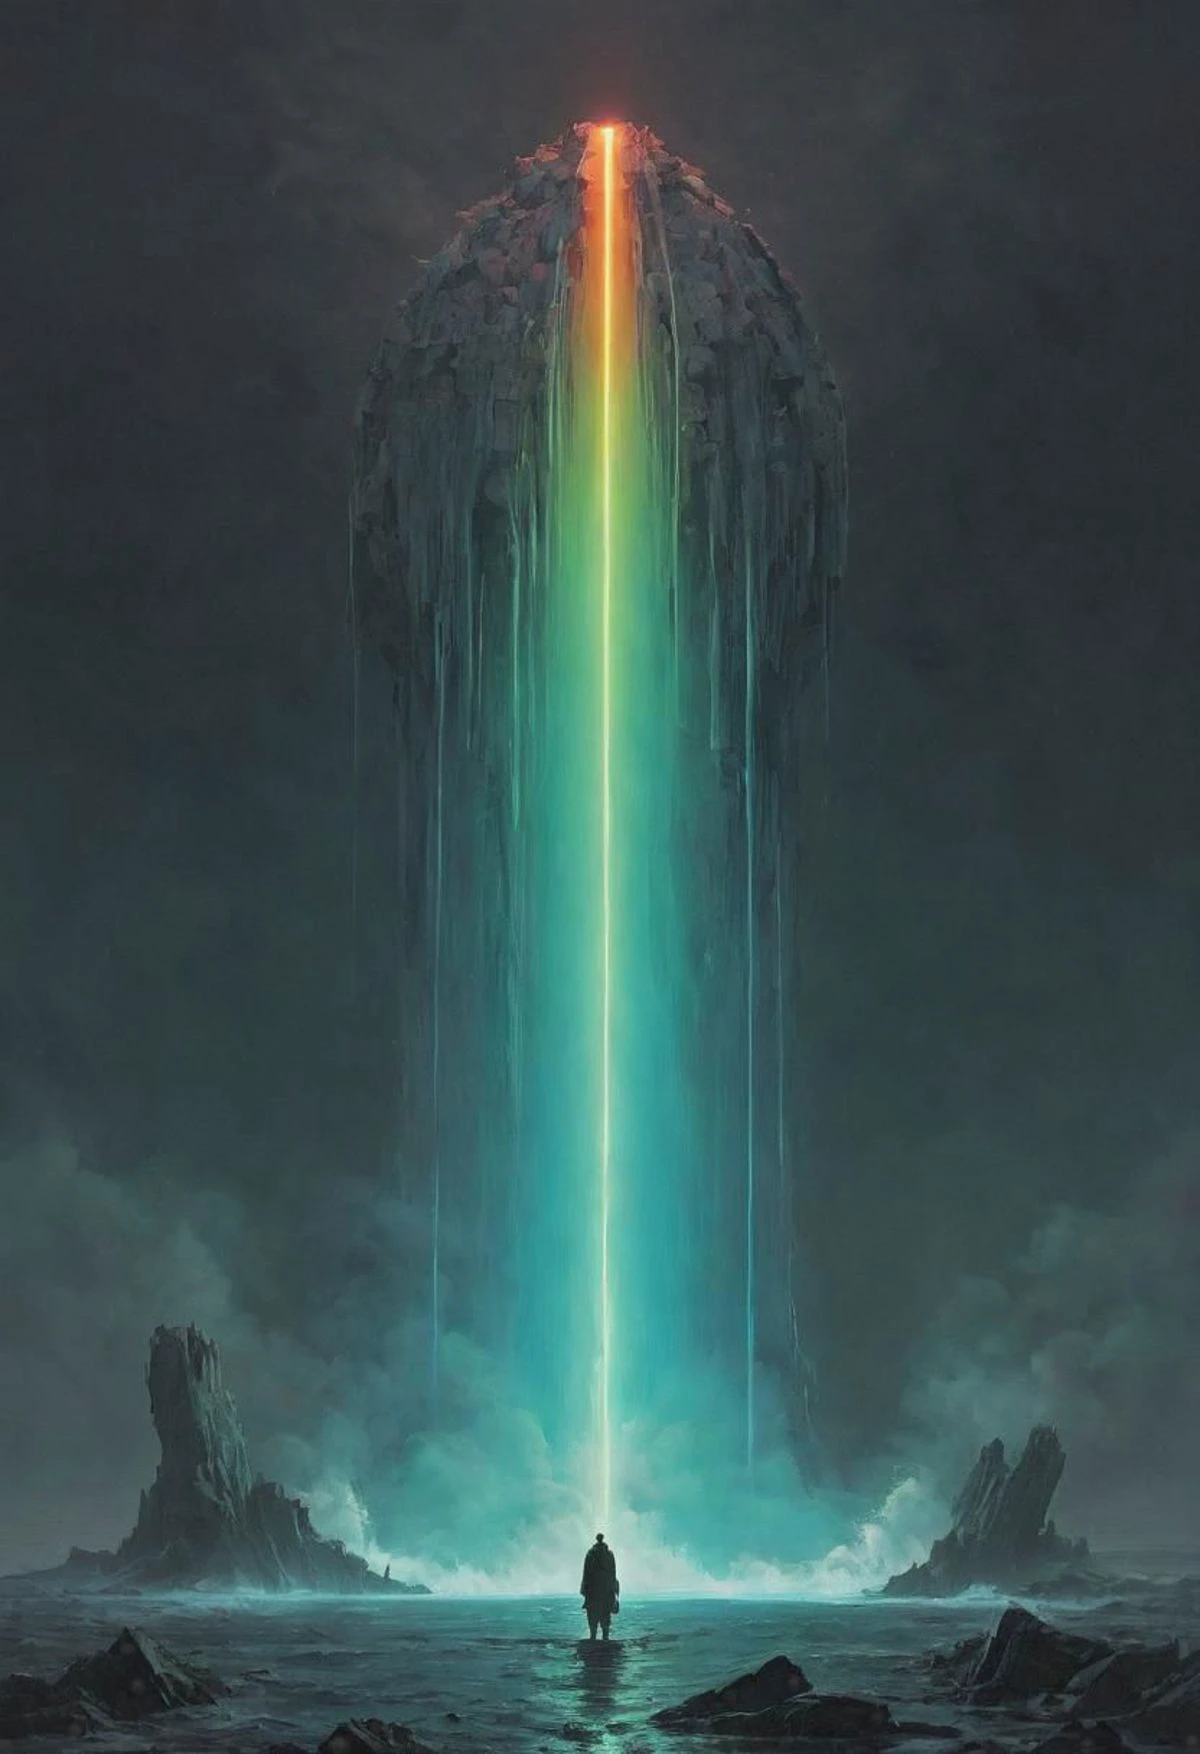 Capture the dystopian modern dystopian casual essence of moses as he relentlessly splits up the sea into two gigantic neon-pastel water columns. Explore the somber tones and bleak atmosphere in your depiction, emphasizing the eternal struggle and challenge of his plans from a side perspective.